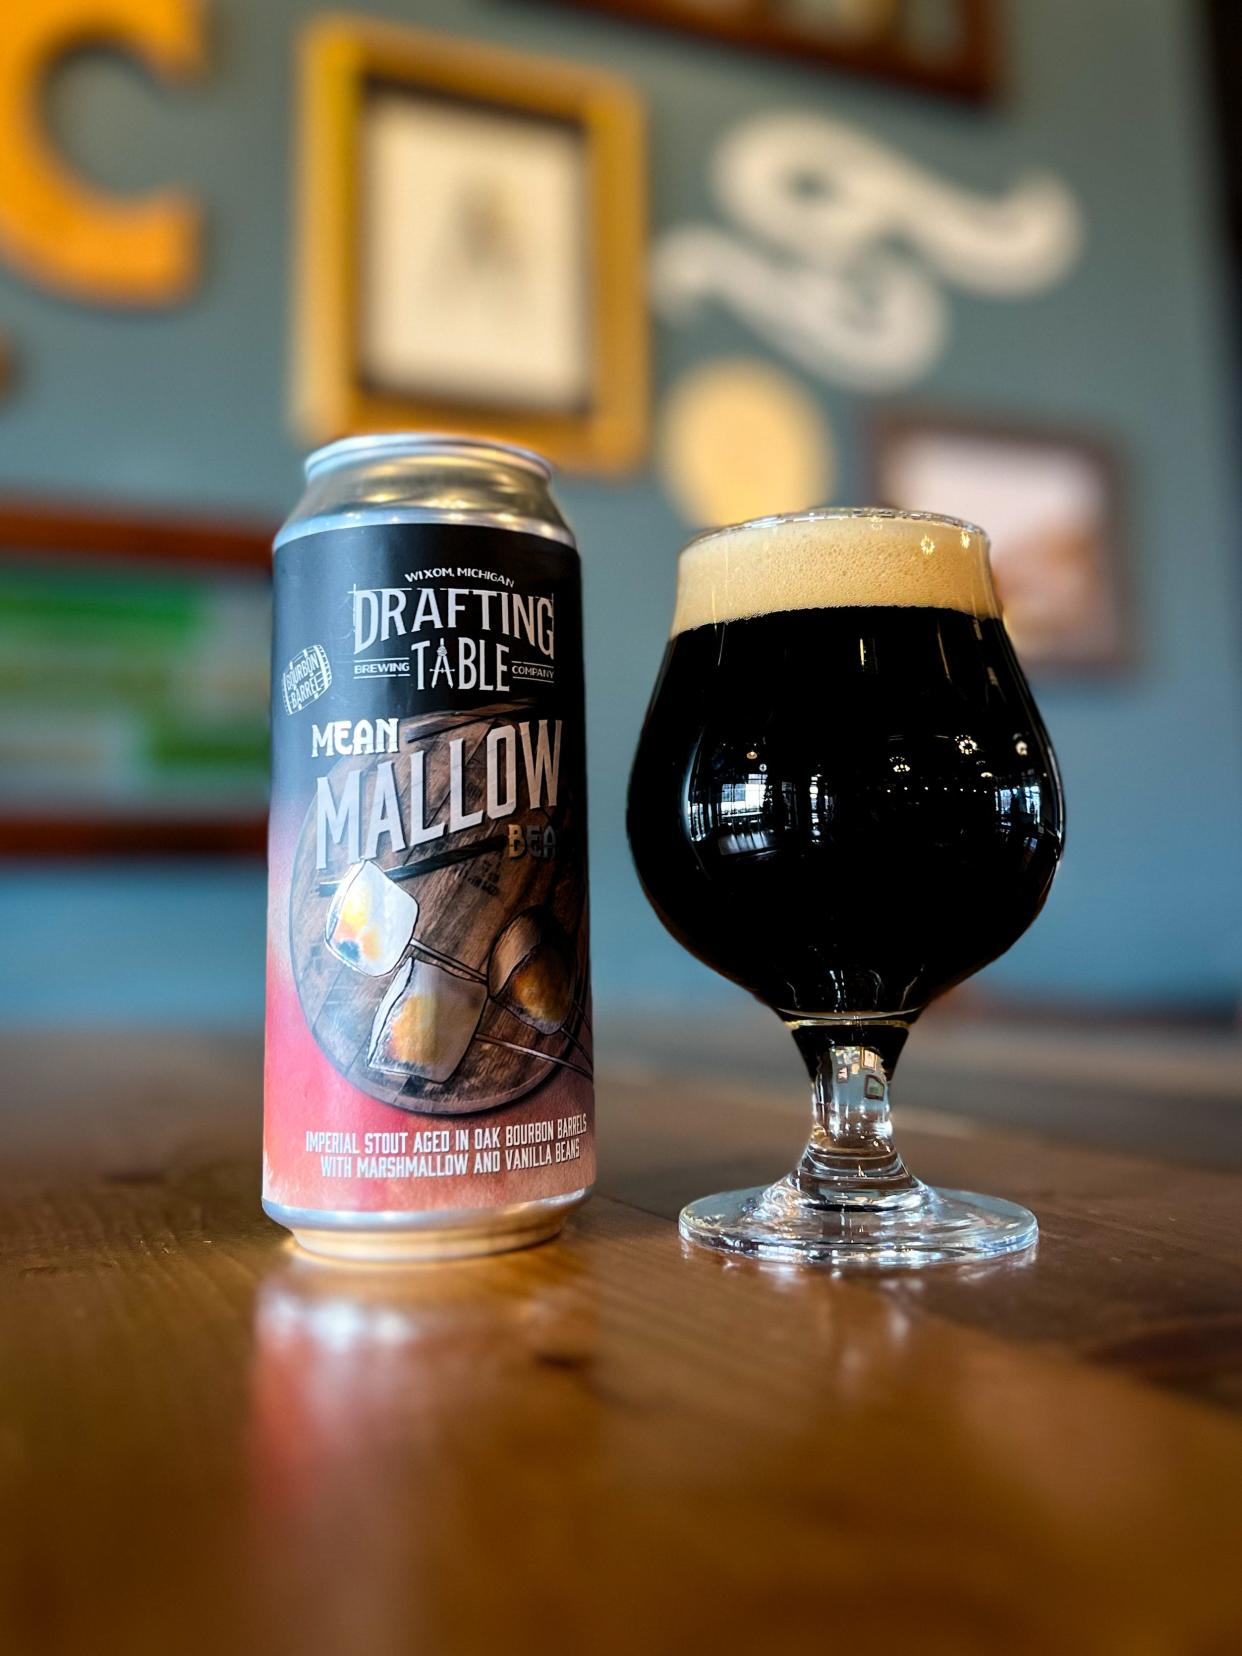 Mean Mallow Bean, a bourbon barrel-aged imperial stout from Drafting Table Brewing Co.